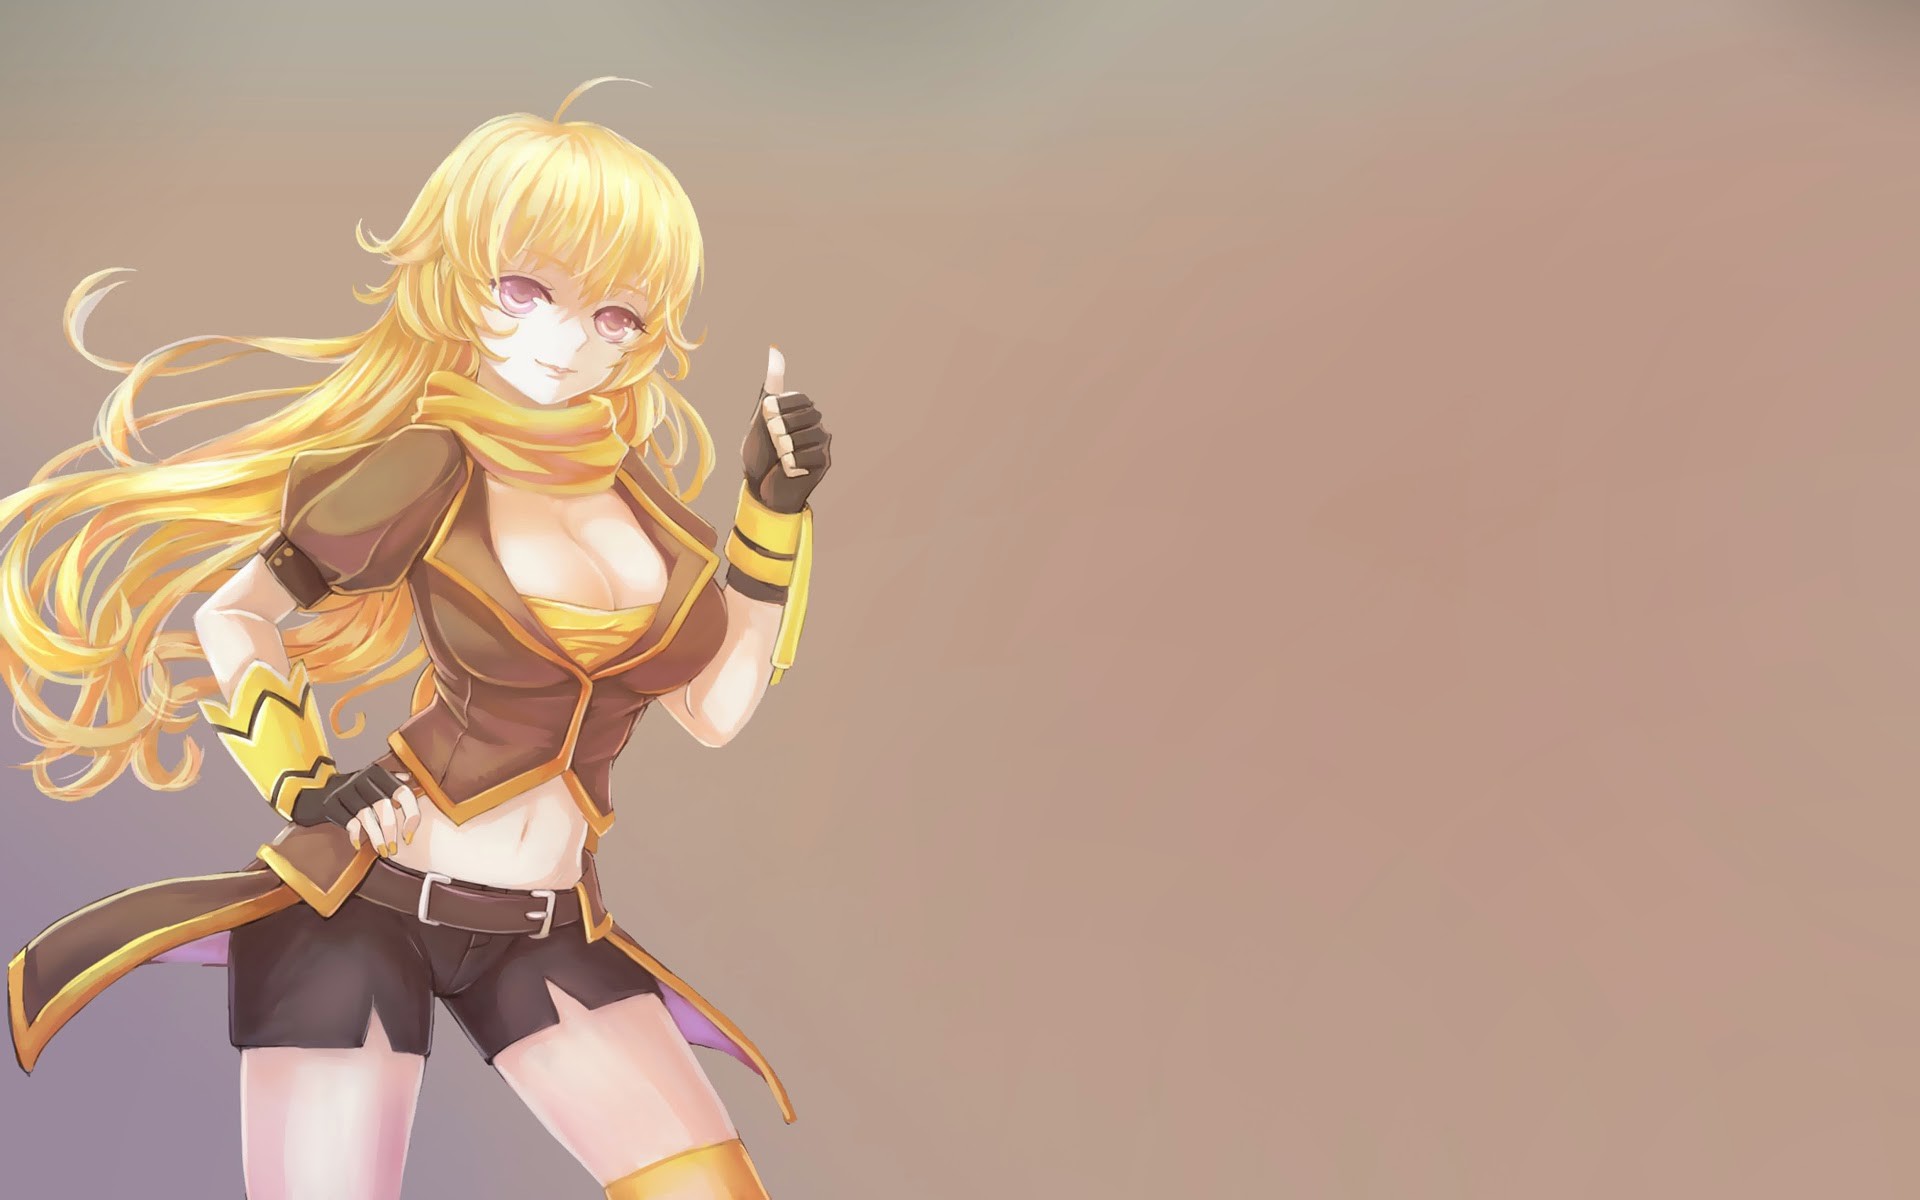 Only one of those is Yang centric, true, but shes in all of them and I like all of those as ideas for a mat image